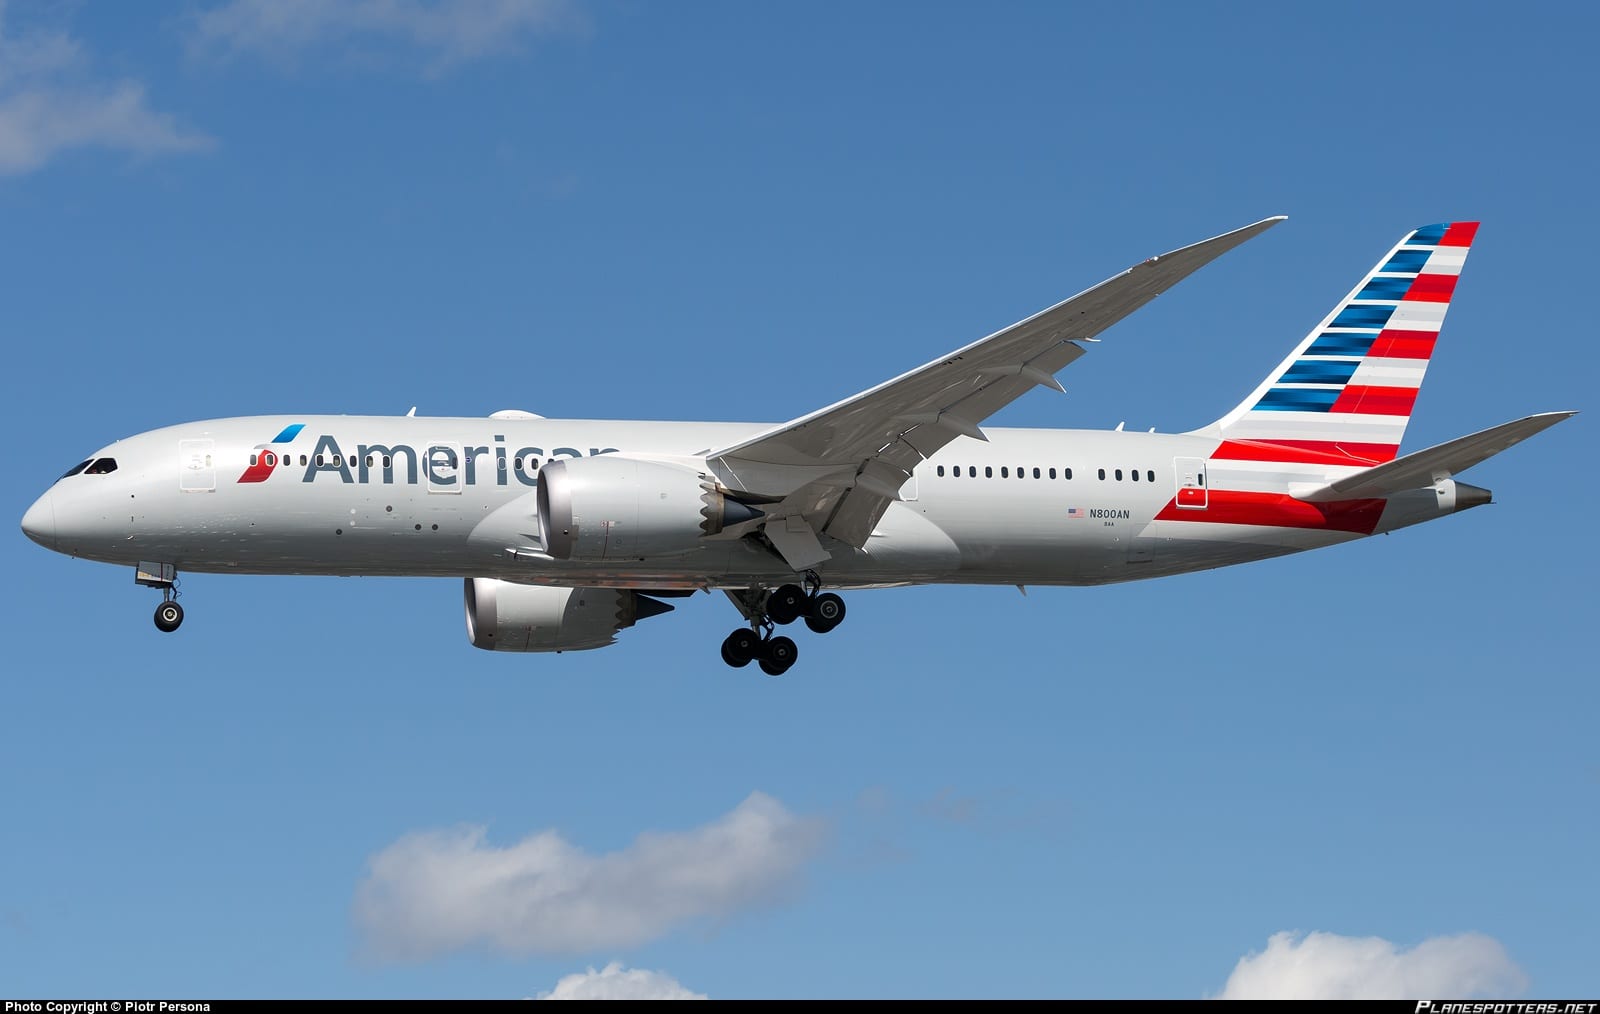 An American Airlines aircraft preparing to land at an airport. Photo: RedRavioVE/File photo.